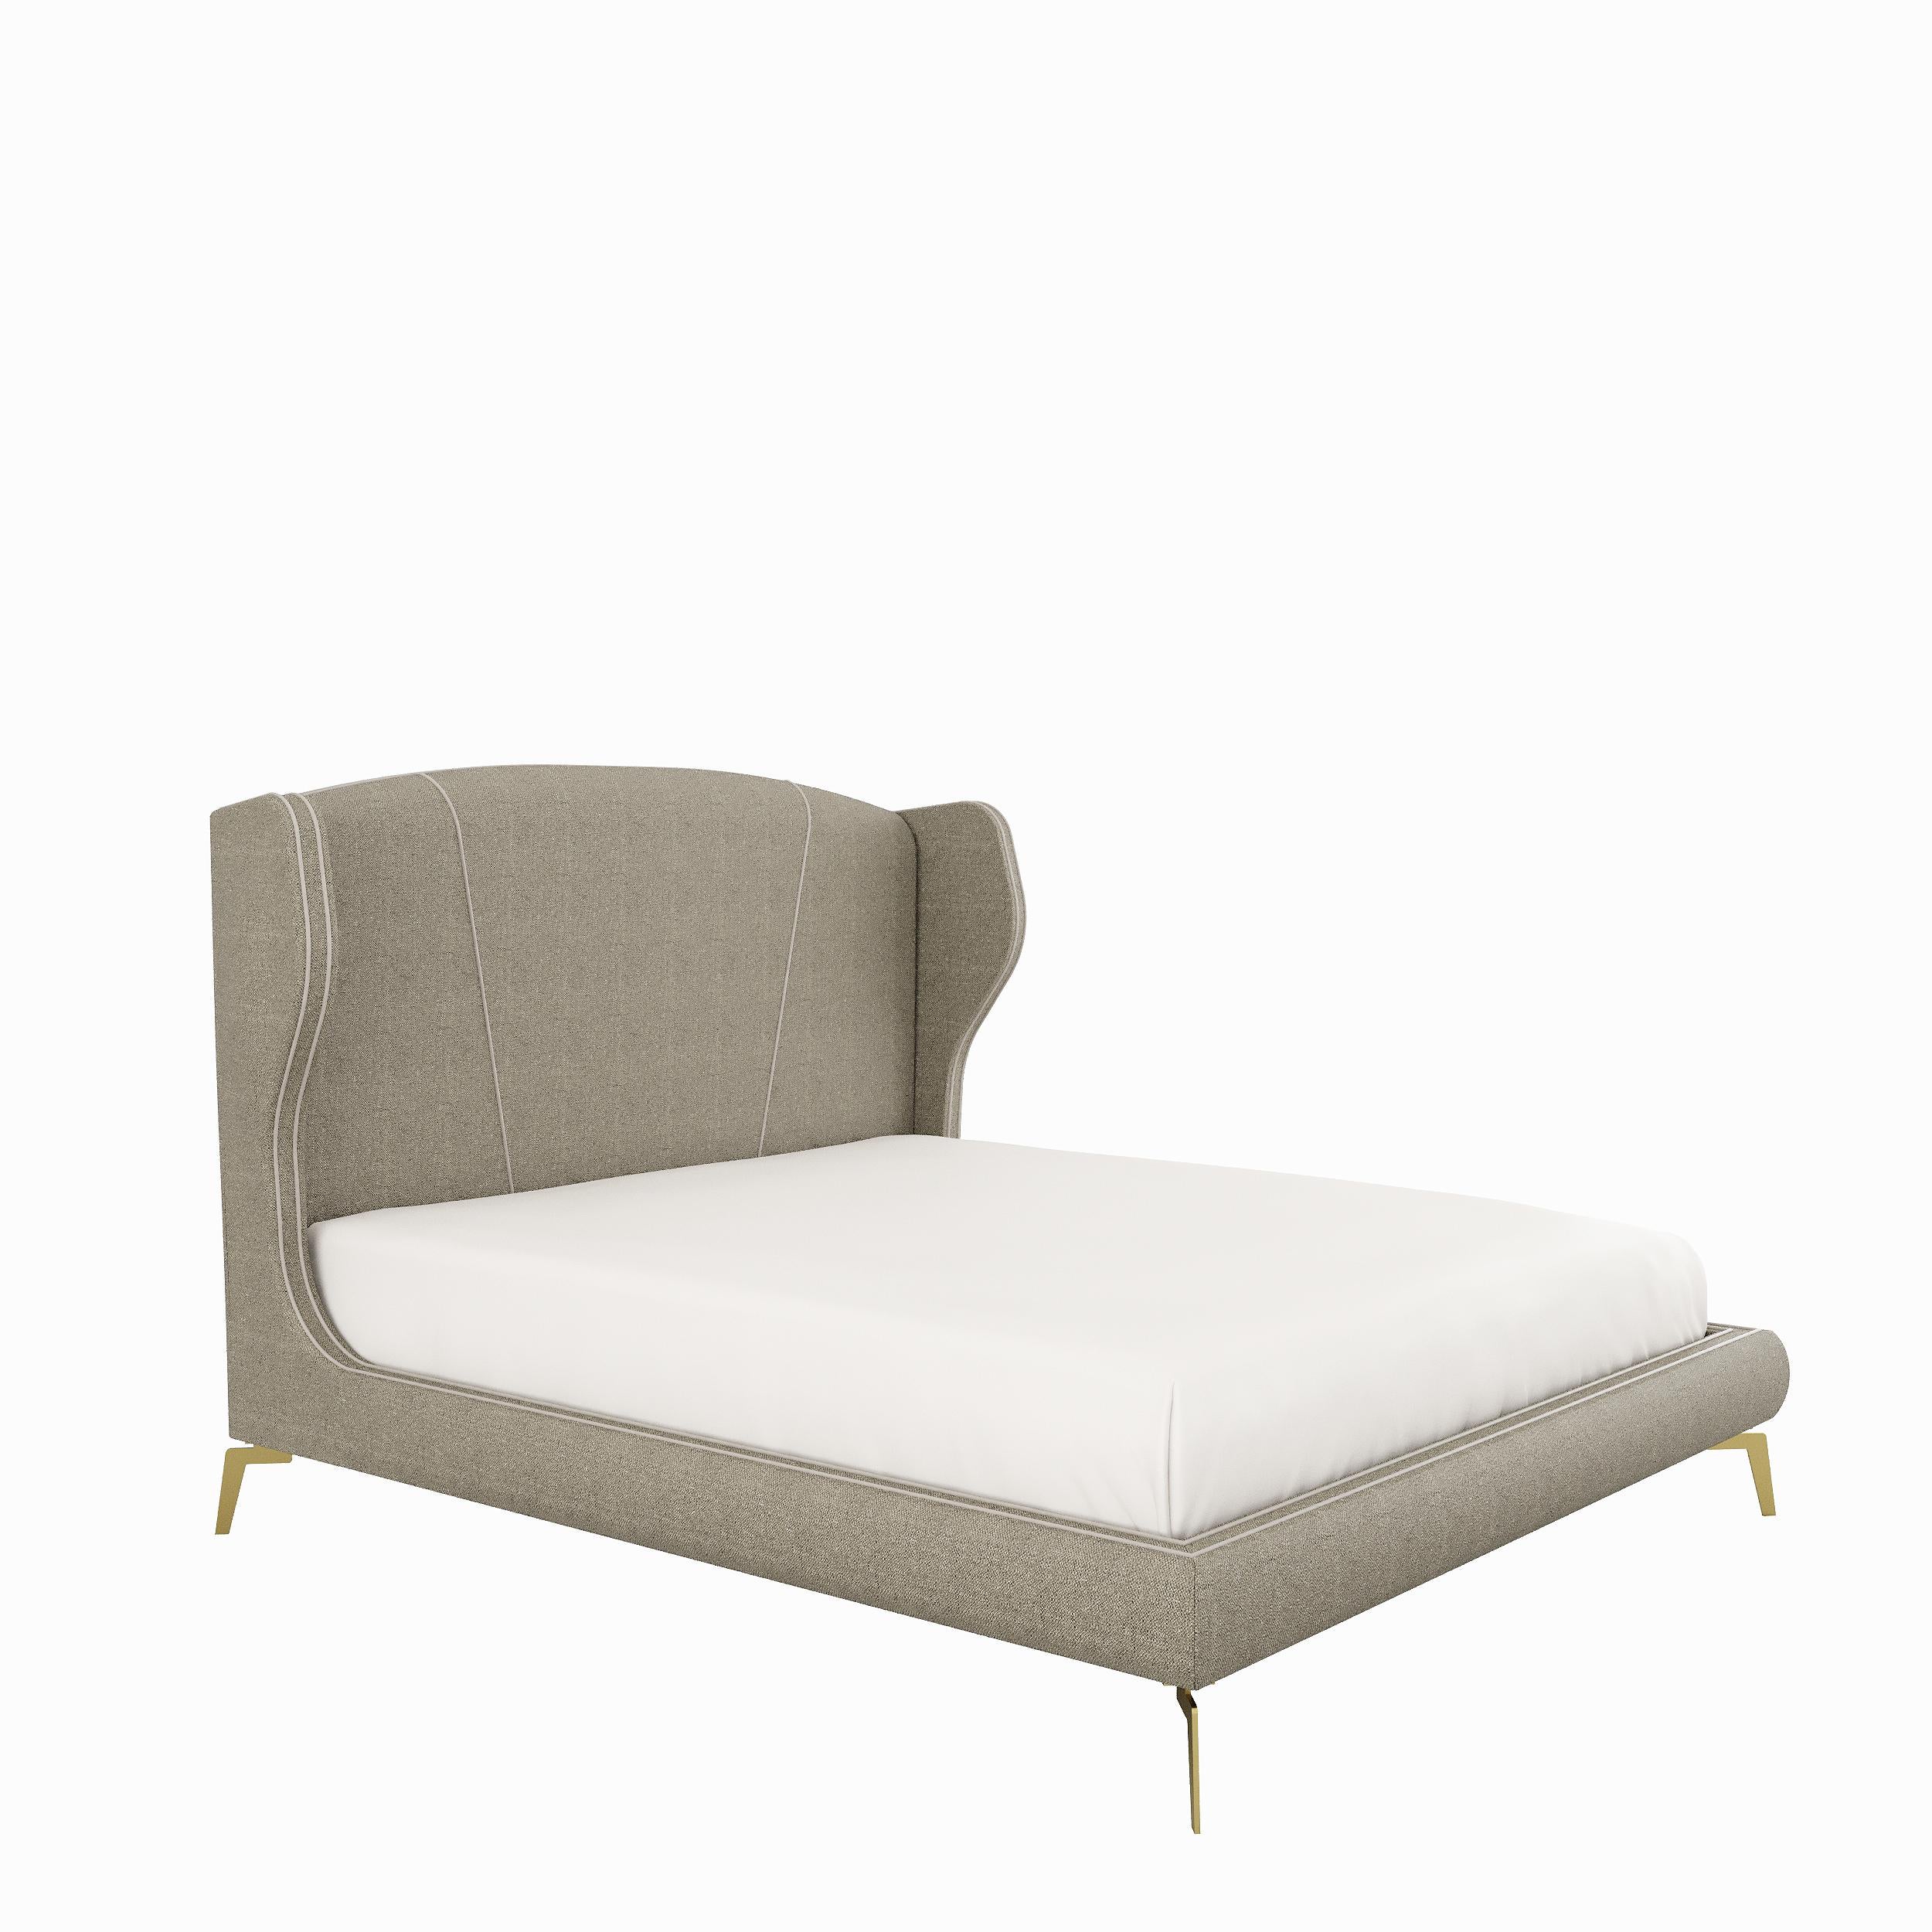 The delicate VIVIEN bed is completely covered in fabric. The seamless contrast piping runs from the headboard to the base, in a gentle touch of elegance. Vivien is available in a choice of finishes, including a wide range of fabric textures. 

Price